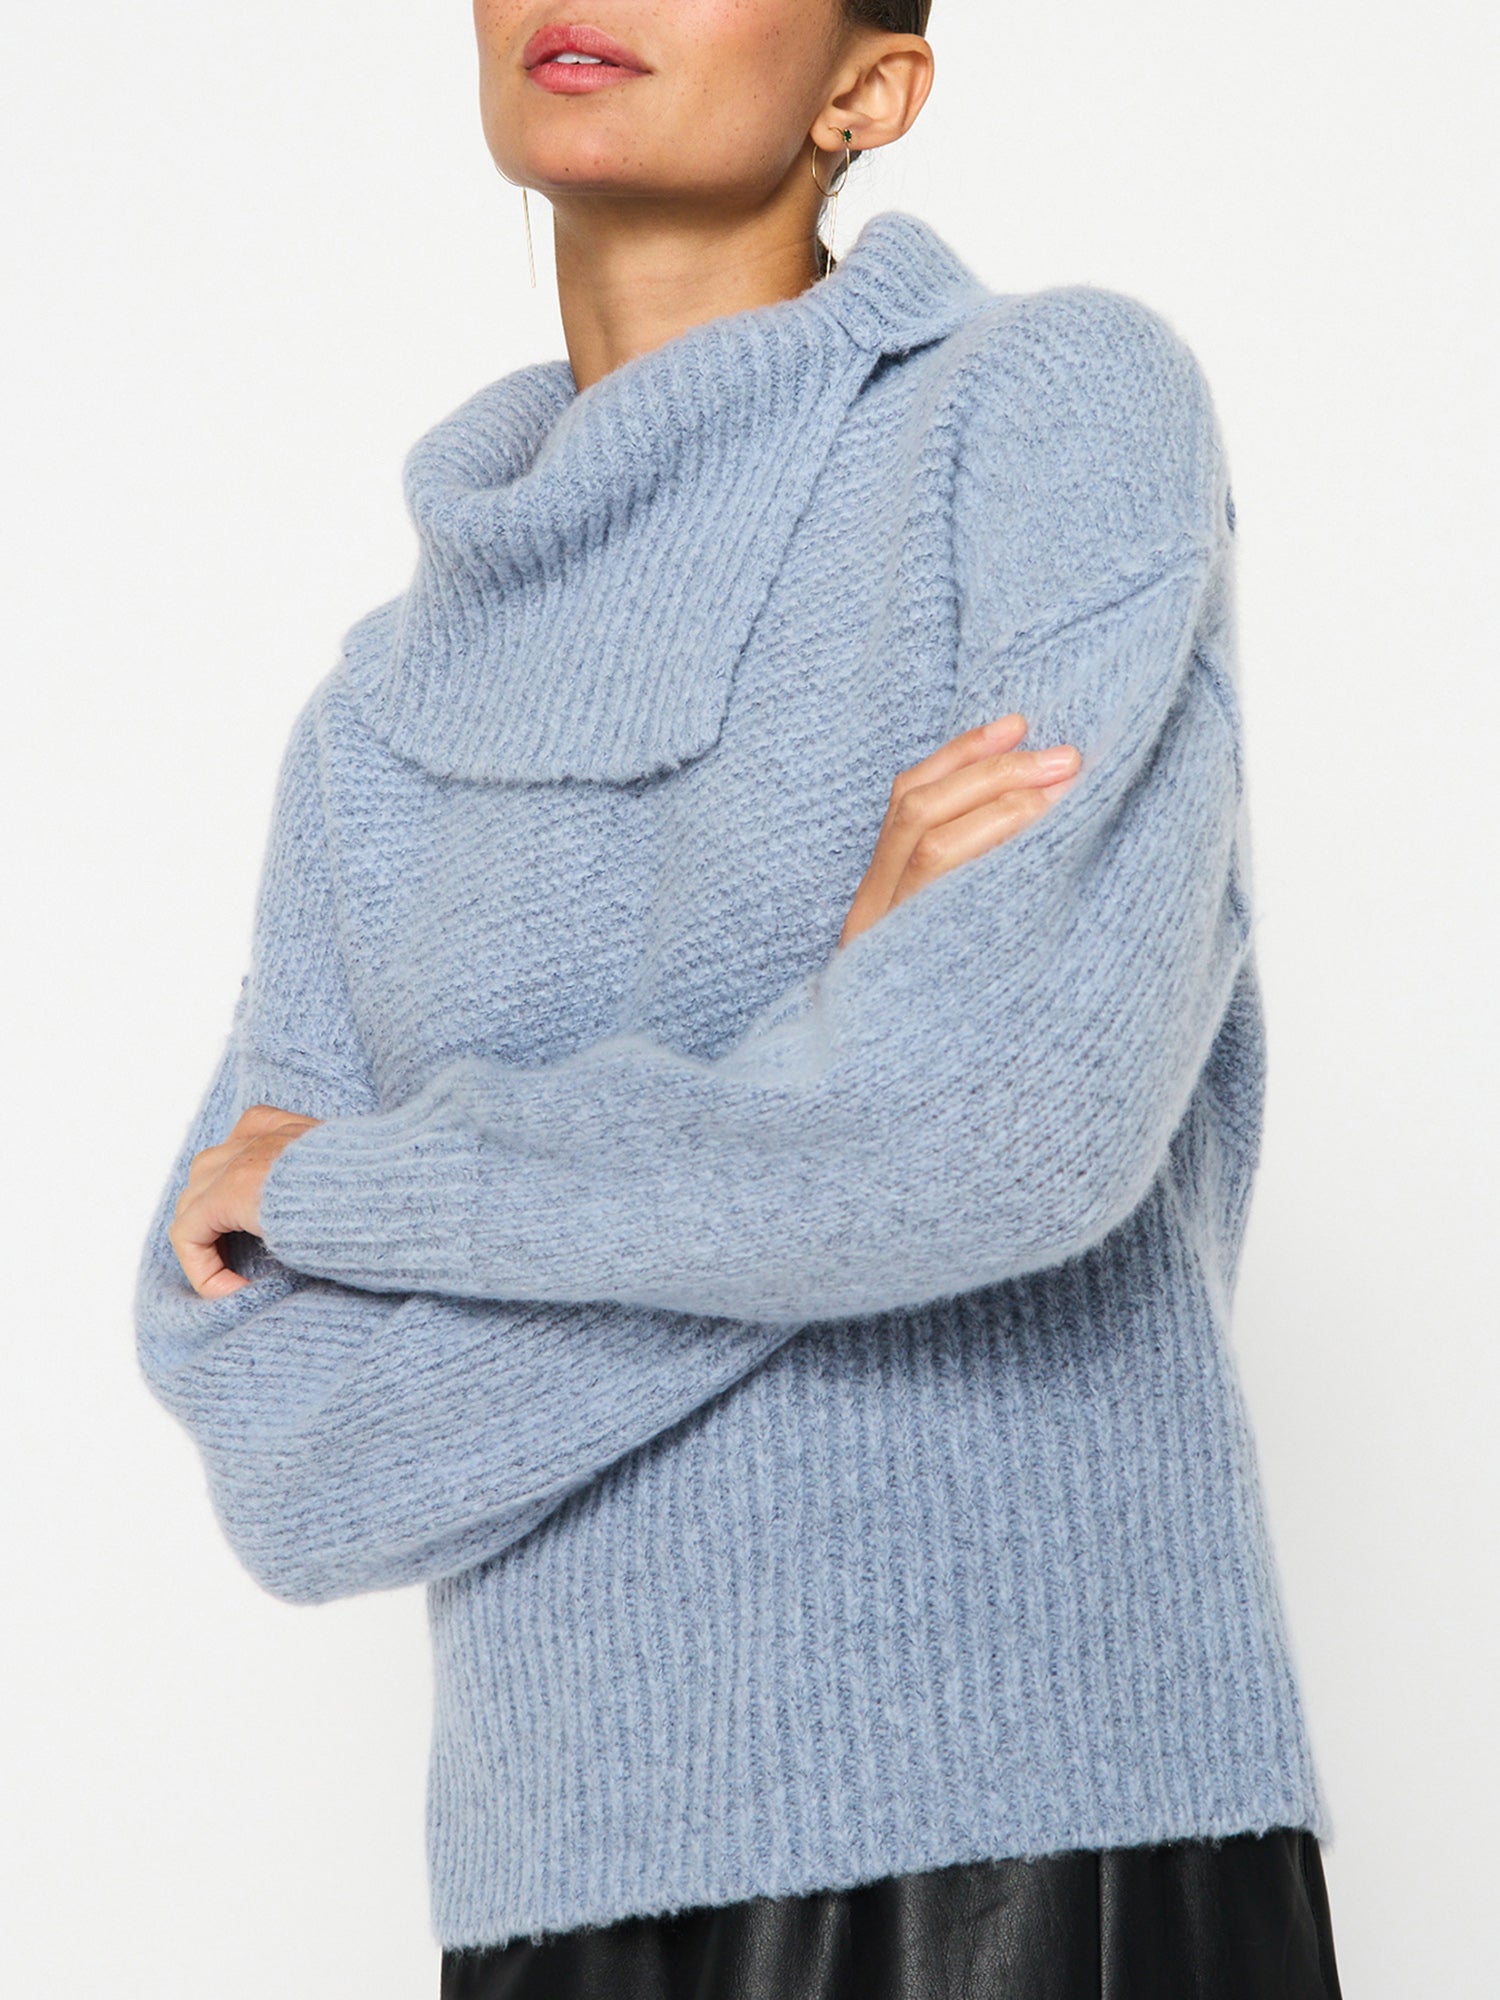 Elian overlap cowlneck wool cashmere blue sweater front view